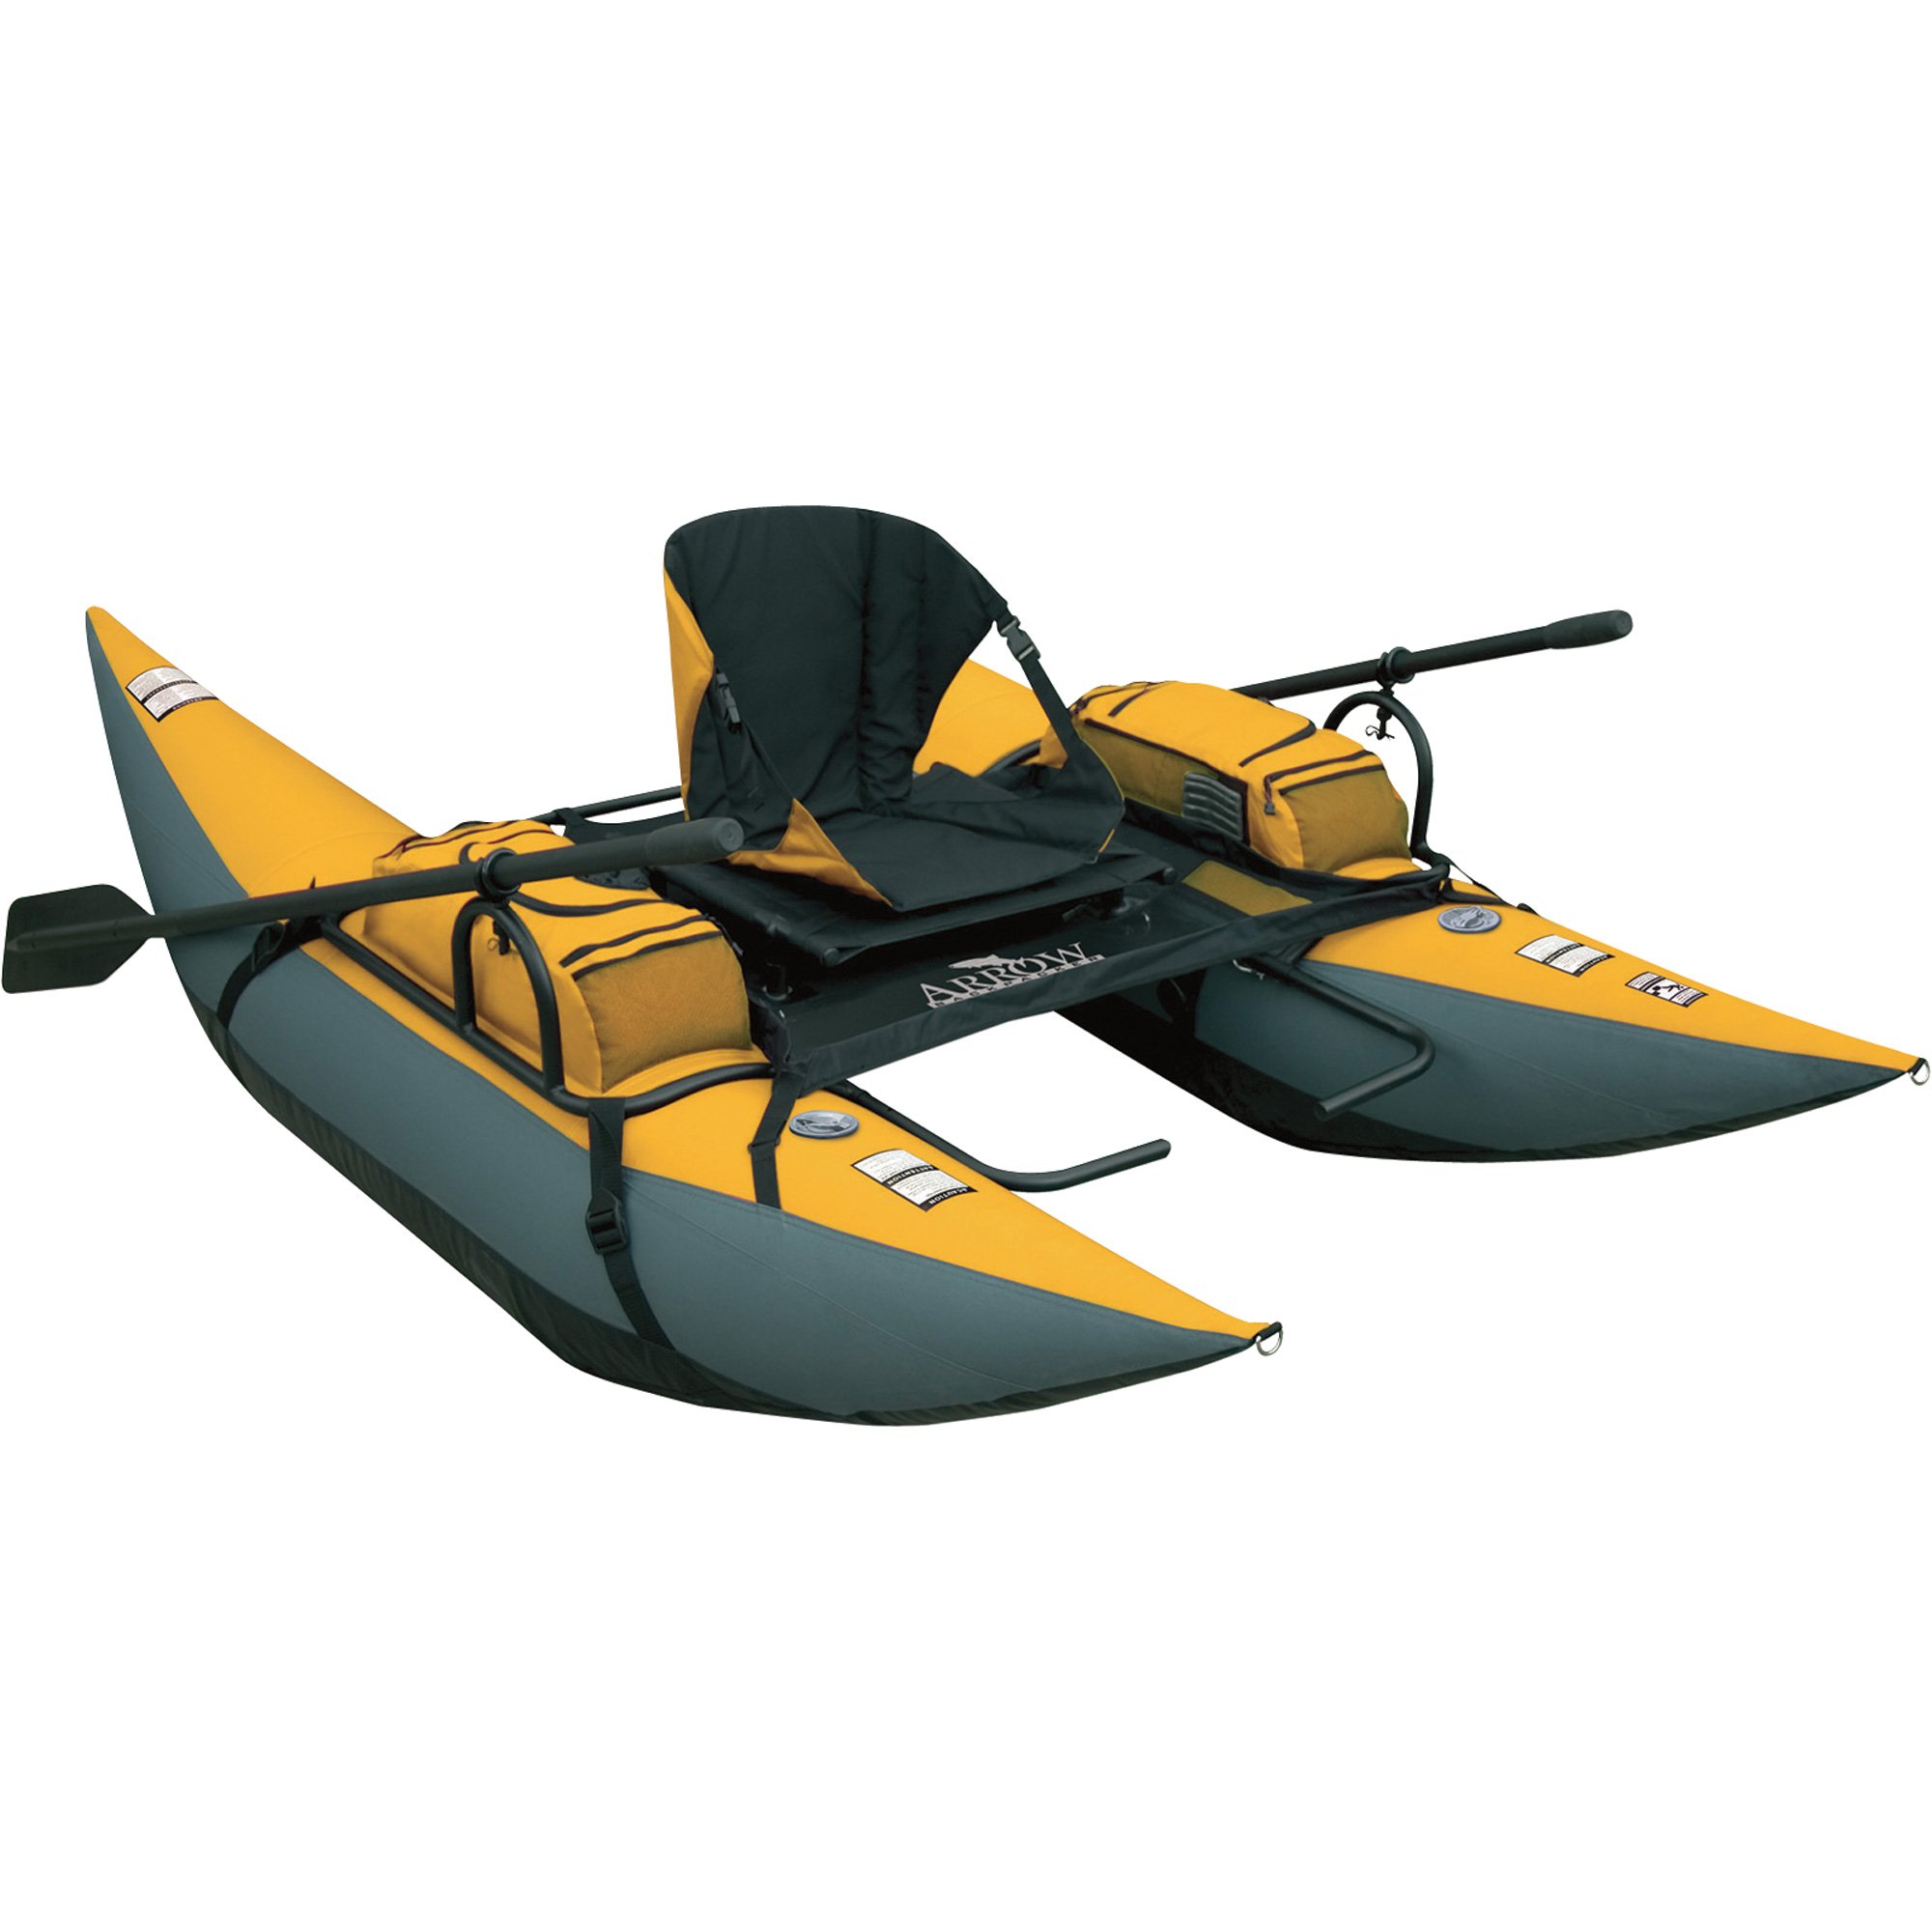 Classic Accessories Backpacker Pontoon Boat — 8-Ft., Yellow, Model# 62267